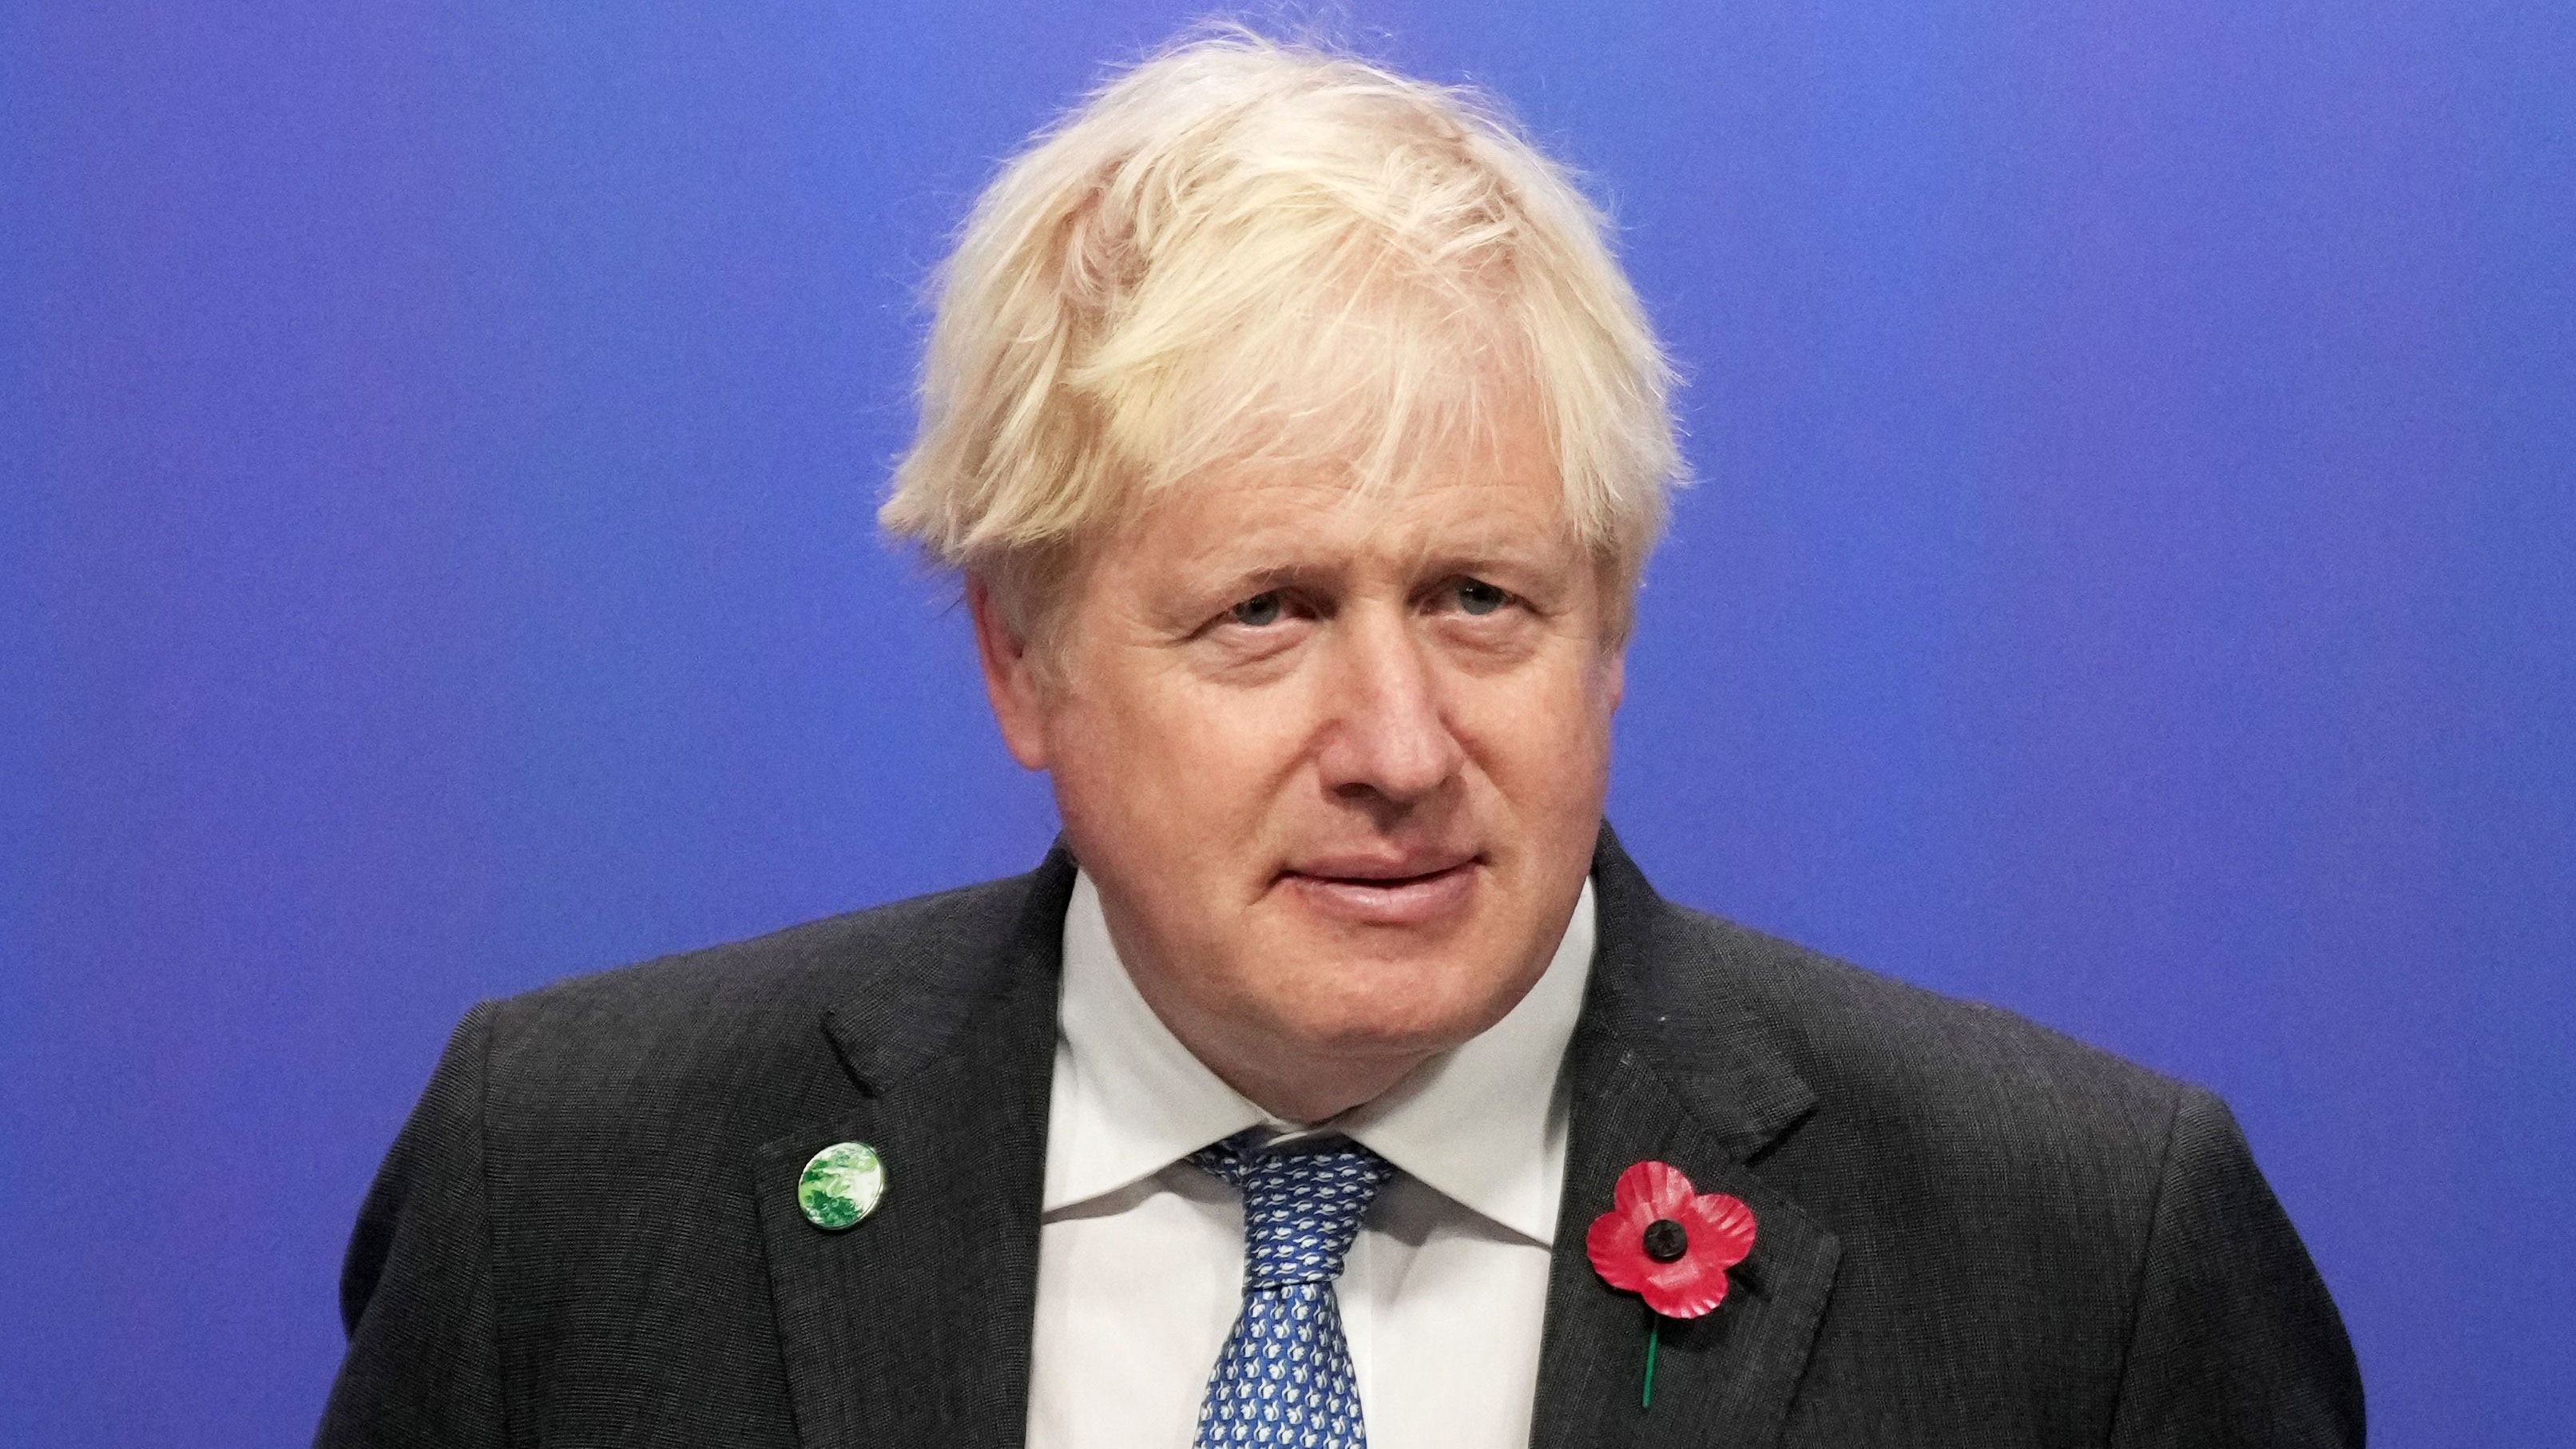 Britain's Prime Minister Boris Johnson waits to greet leaders as they arrive to attend COP26 in Glasgow, Scotland, on November 1.